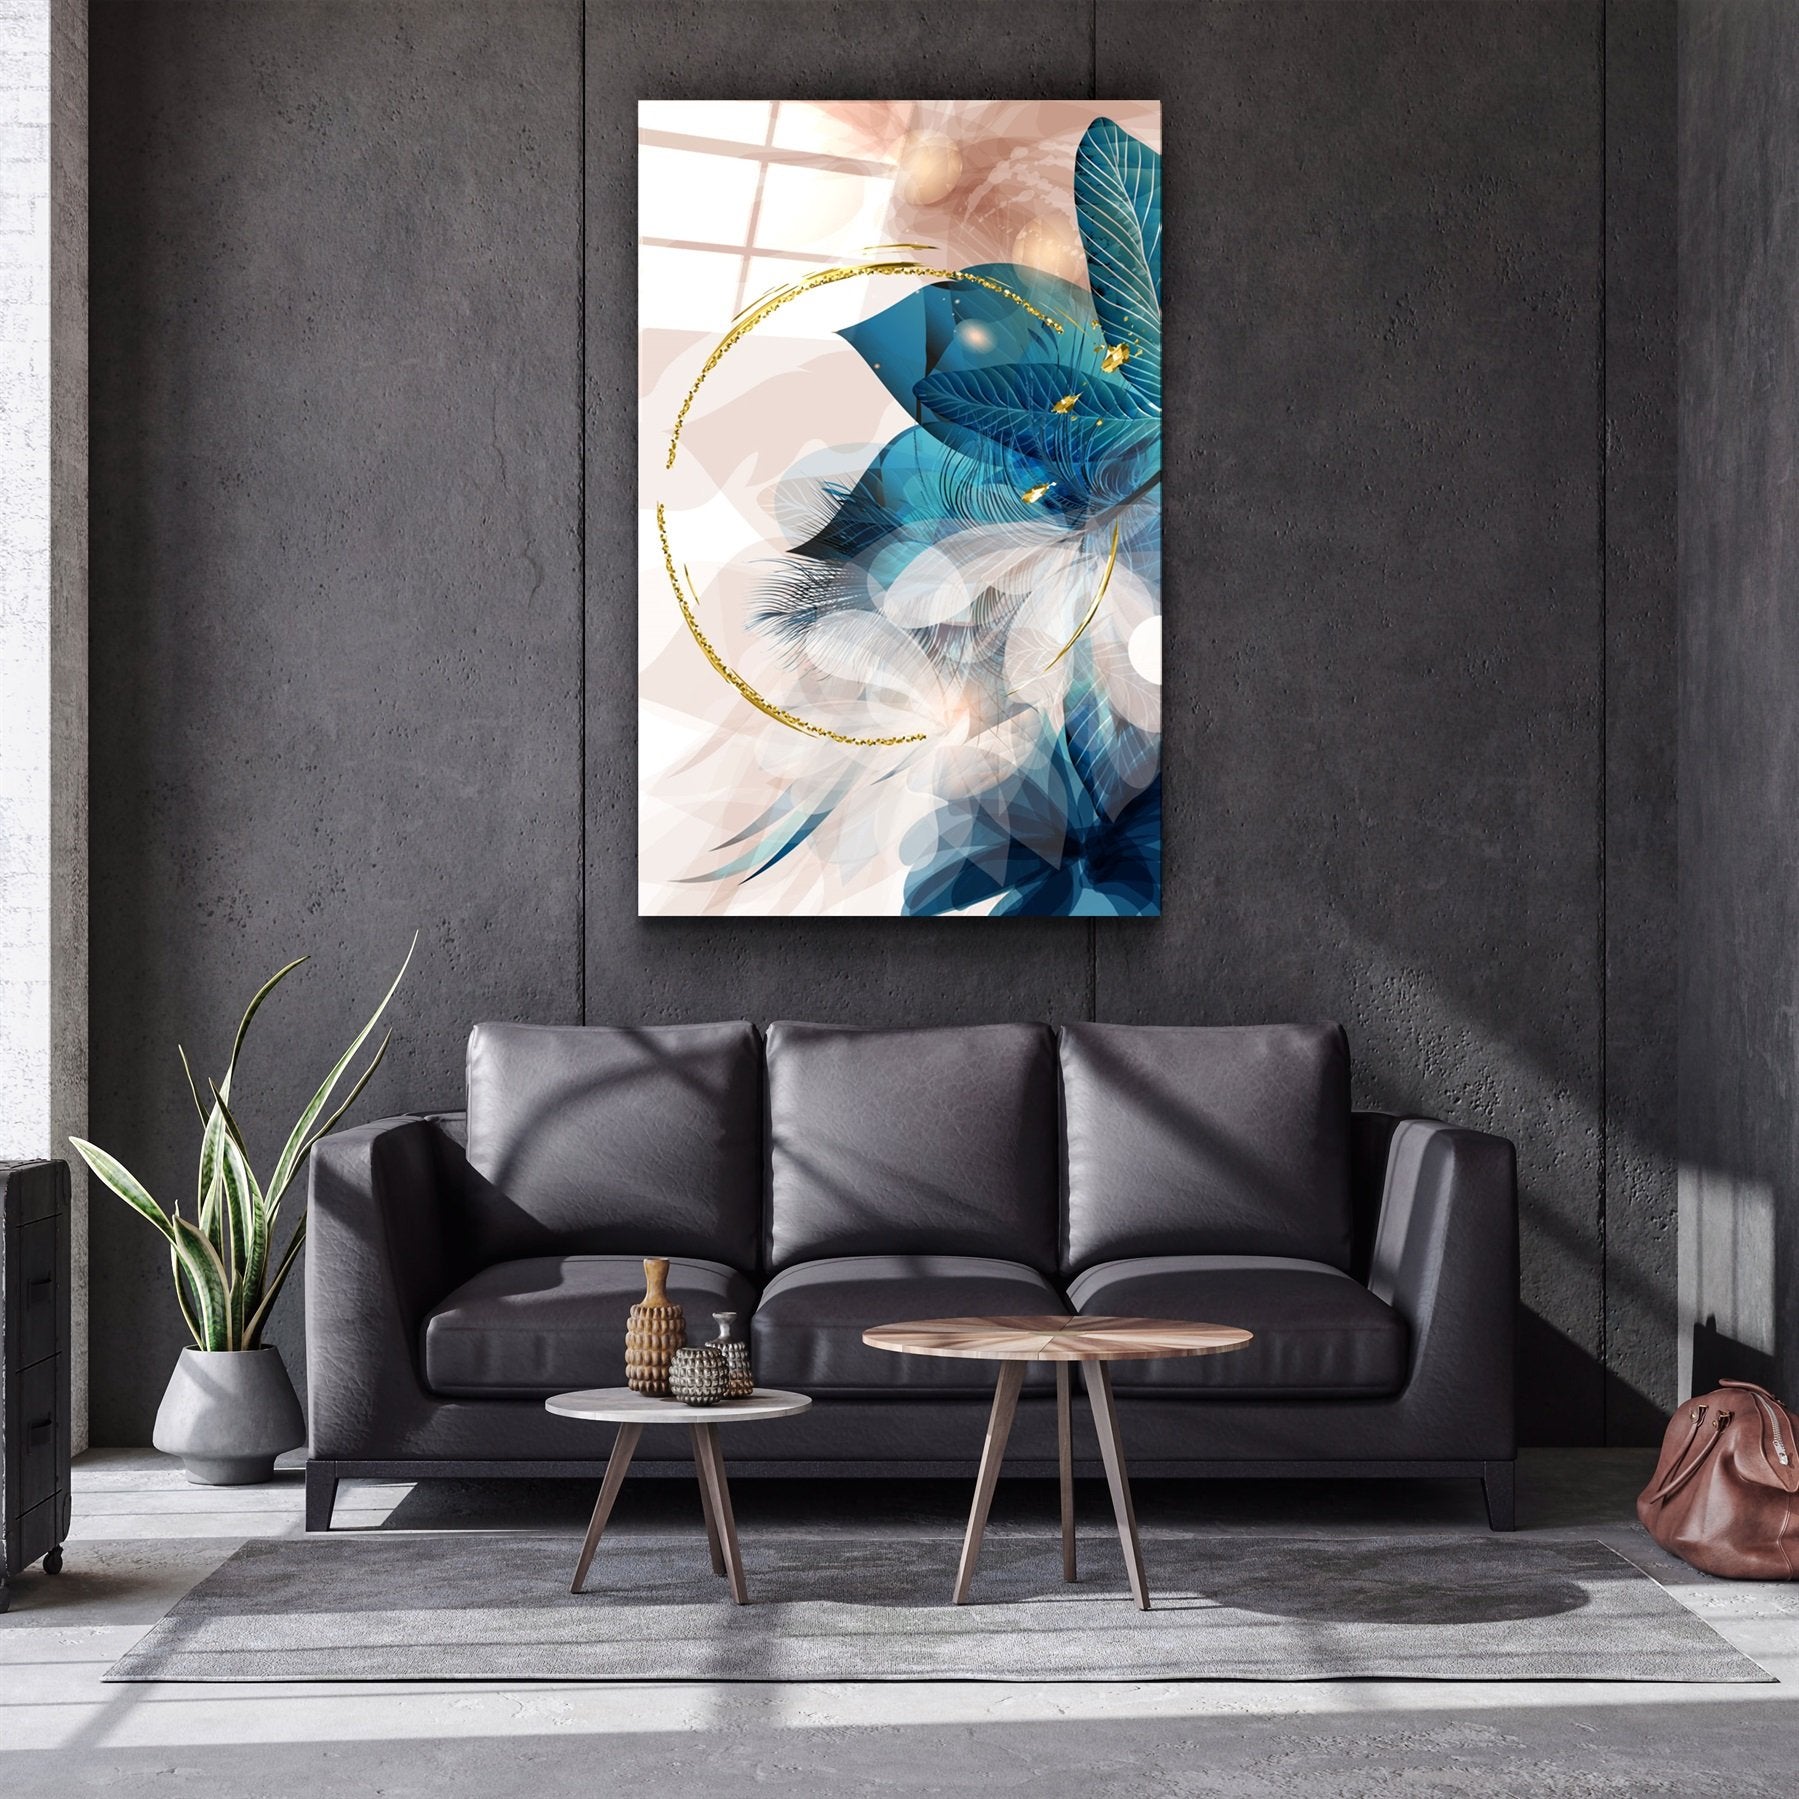 ・"Abstract Blue Leaves"・Glass Wall Art